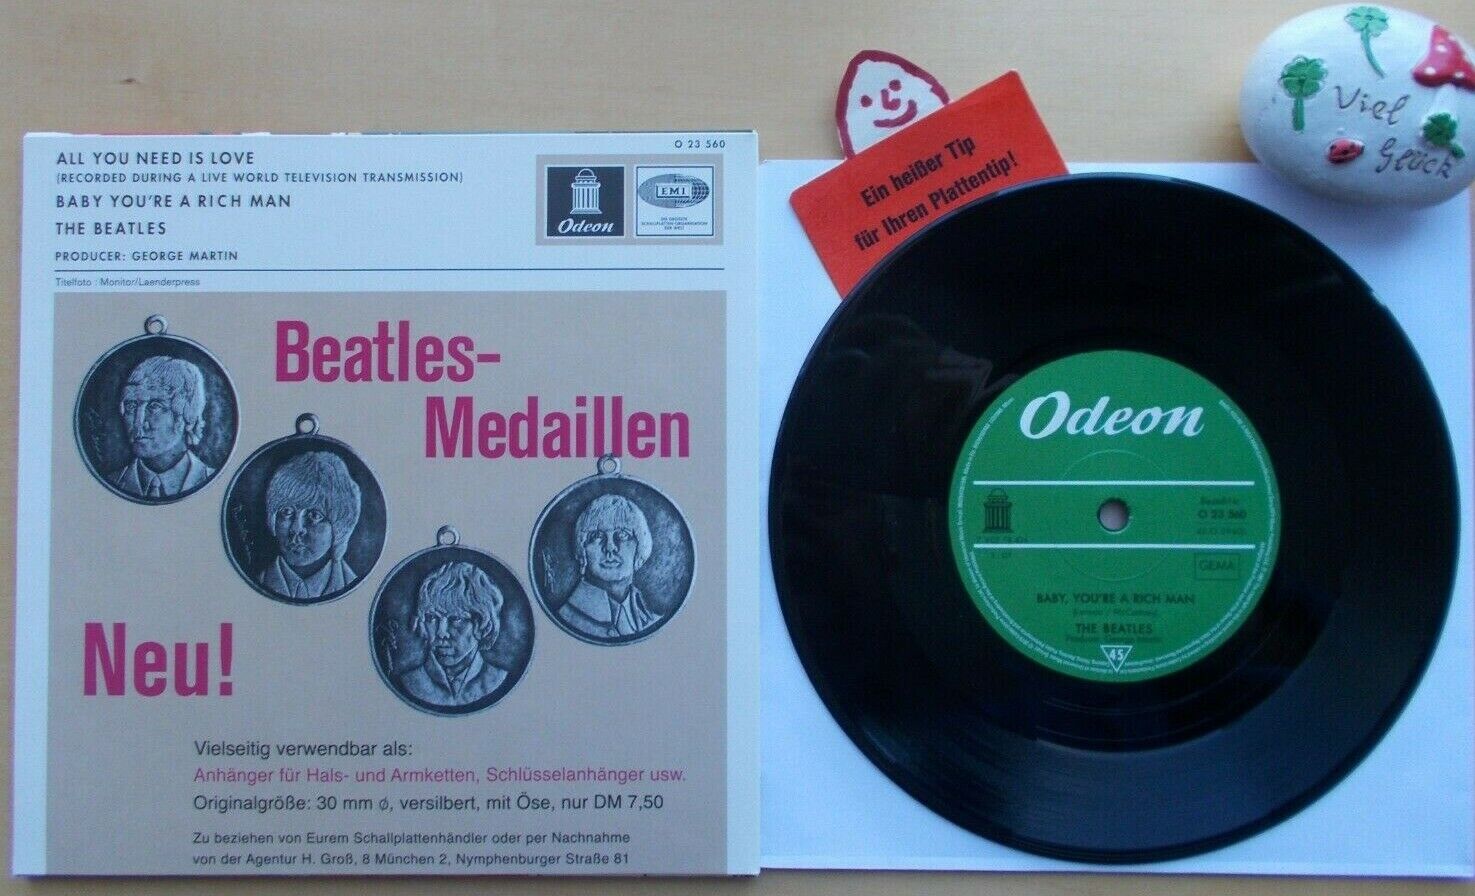 The BEATLES All You Need Is Love★Baby, You're★Odeon O 23 560 - Medal Reklama Ograniczona ilość, oryginalna